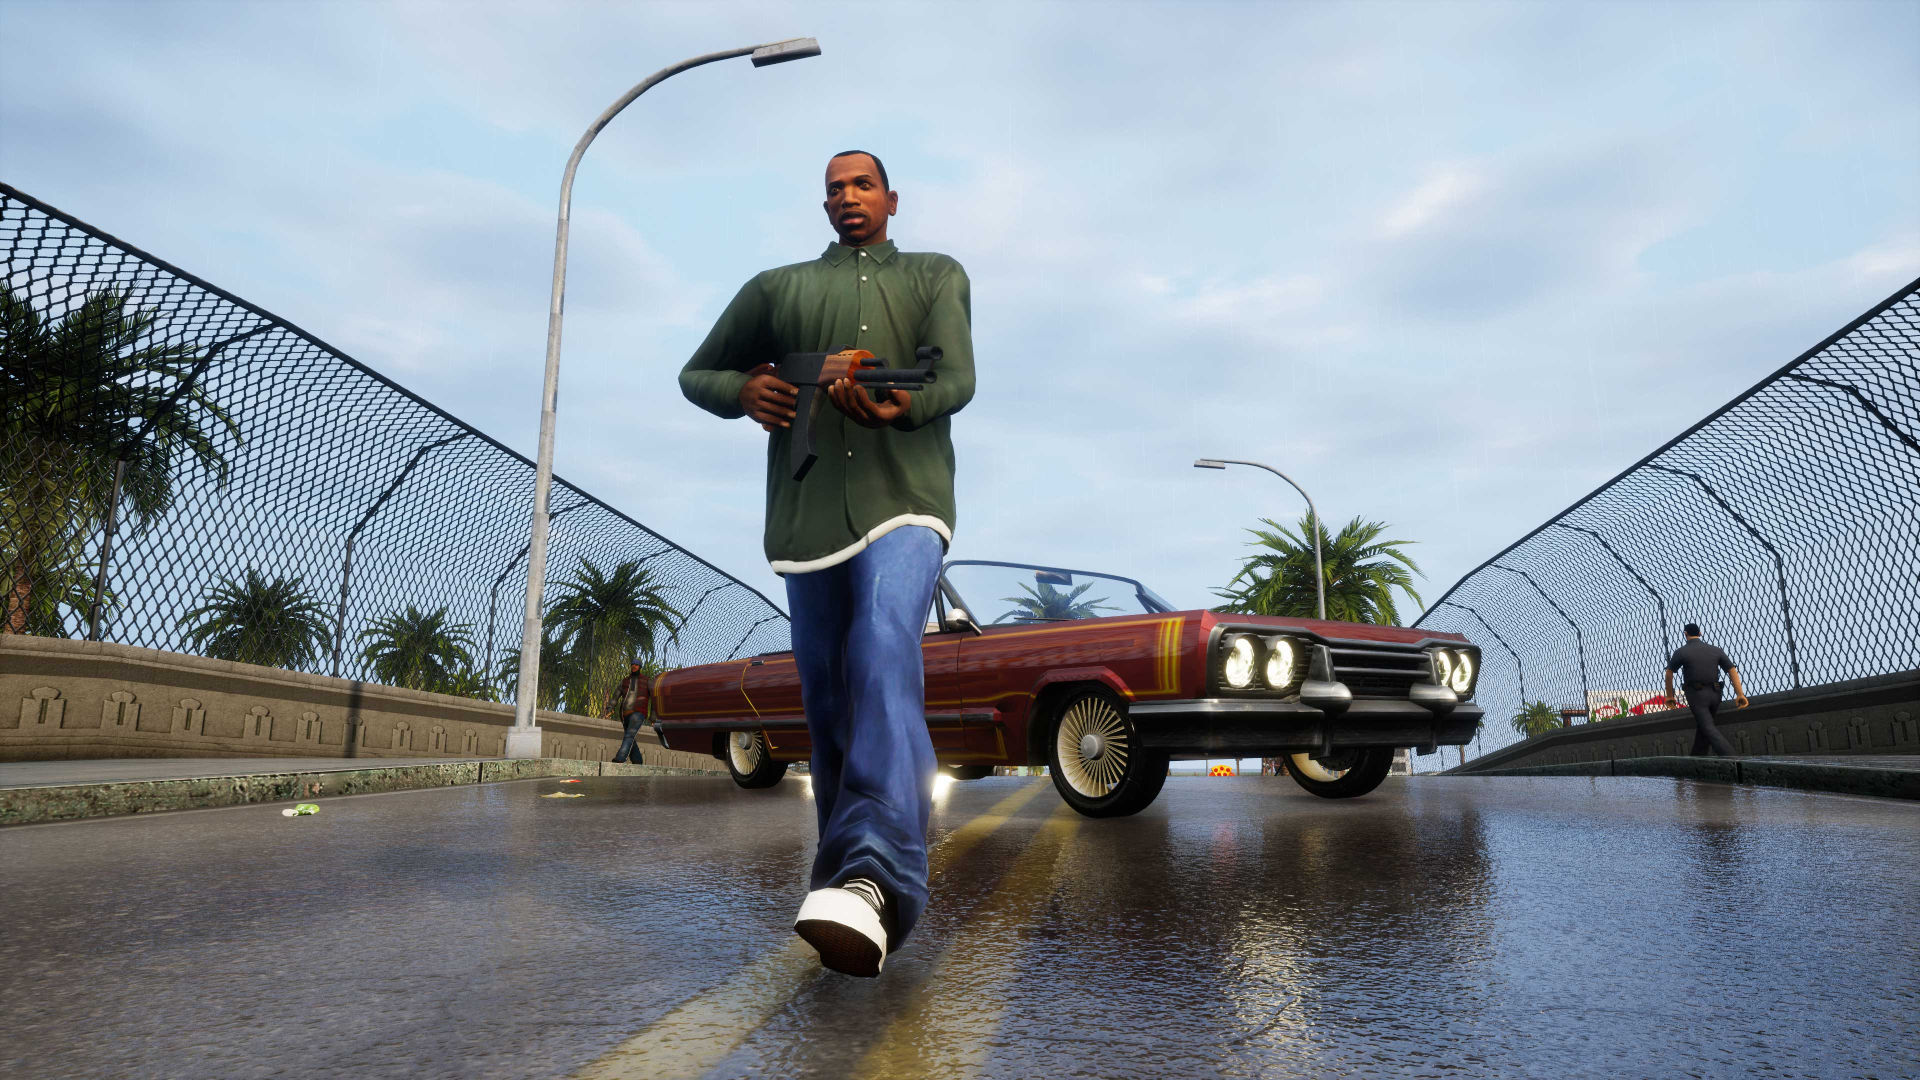 Netflix gets a major win with GTA: The Trilogy coming to its mobile games  roster